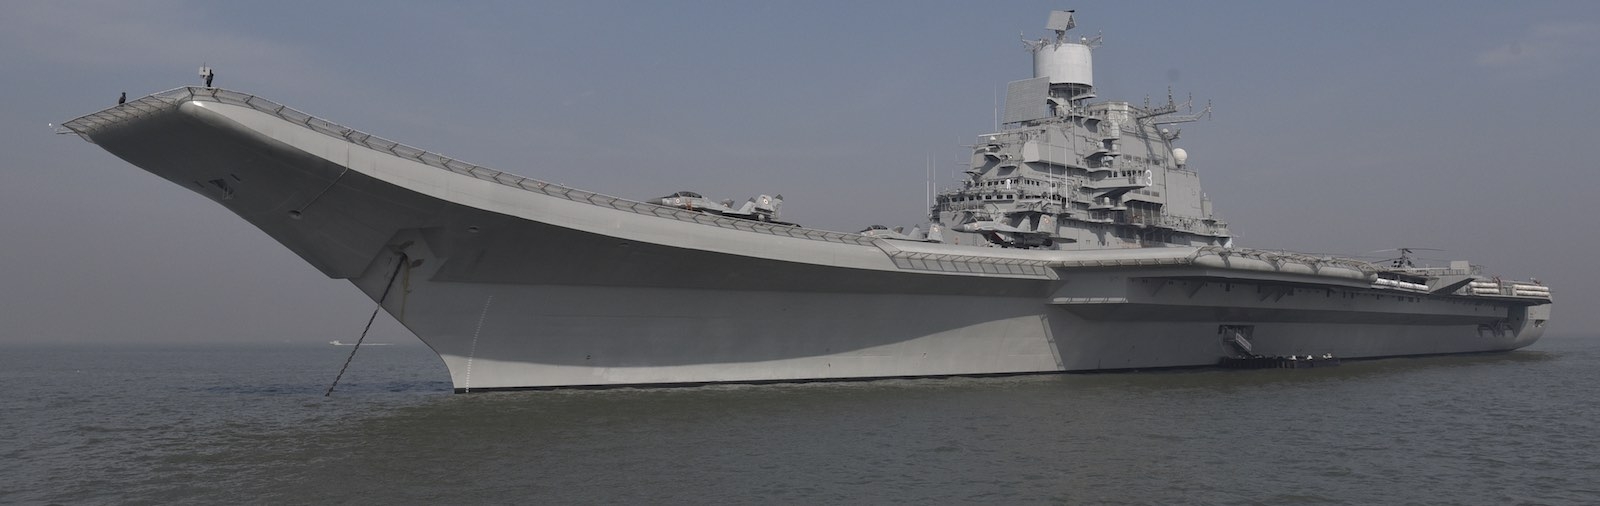 FEATURE | India's interest in unsinkable aircraft carriers - Baird Maritime